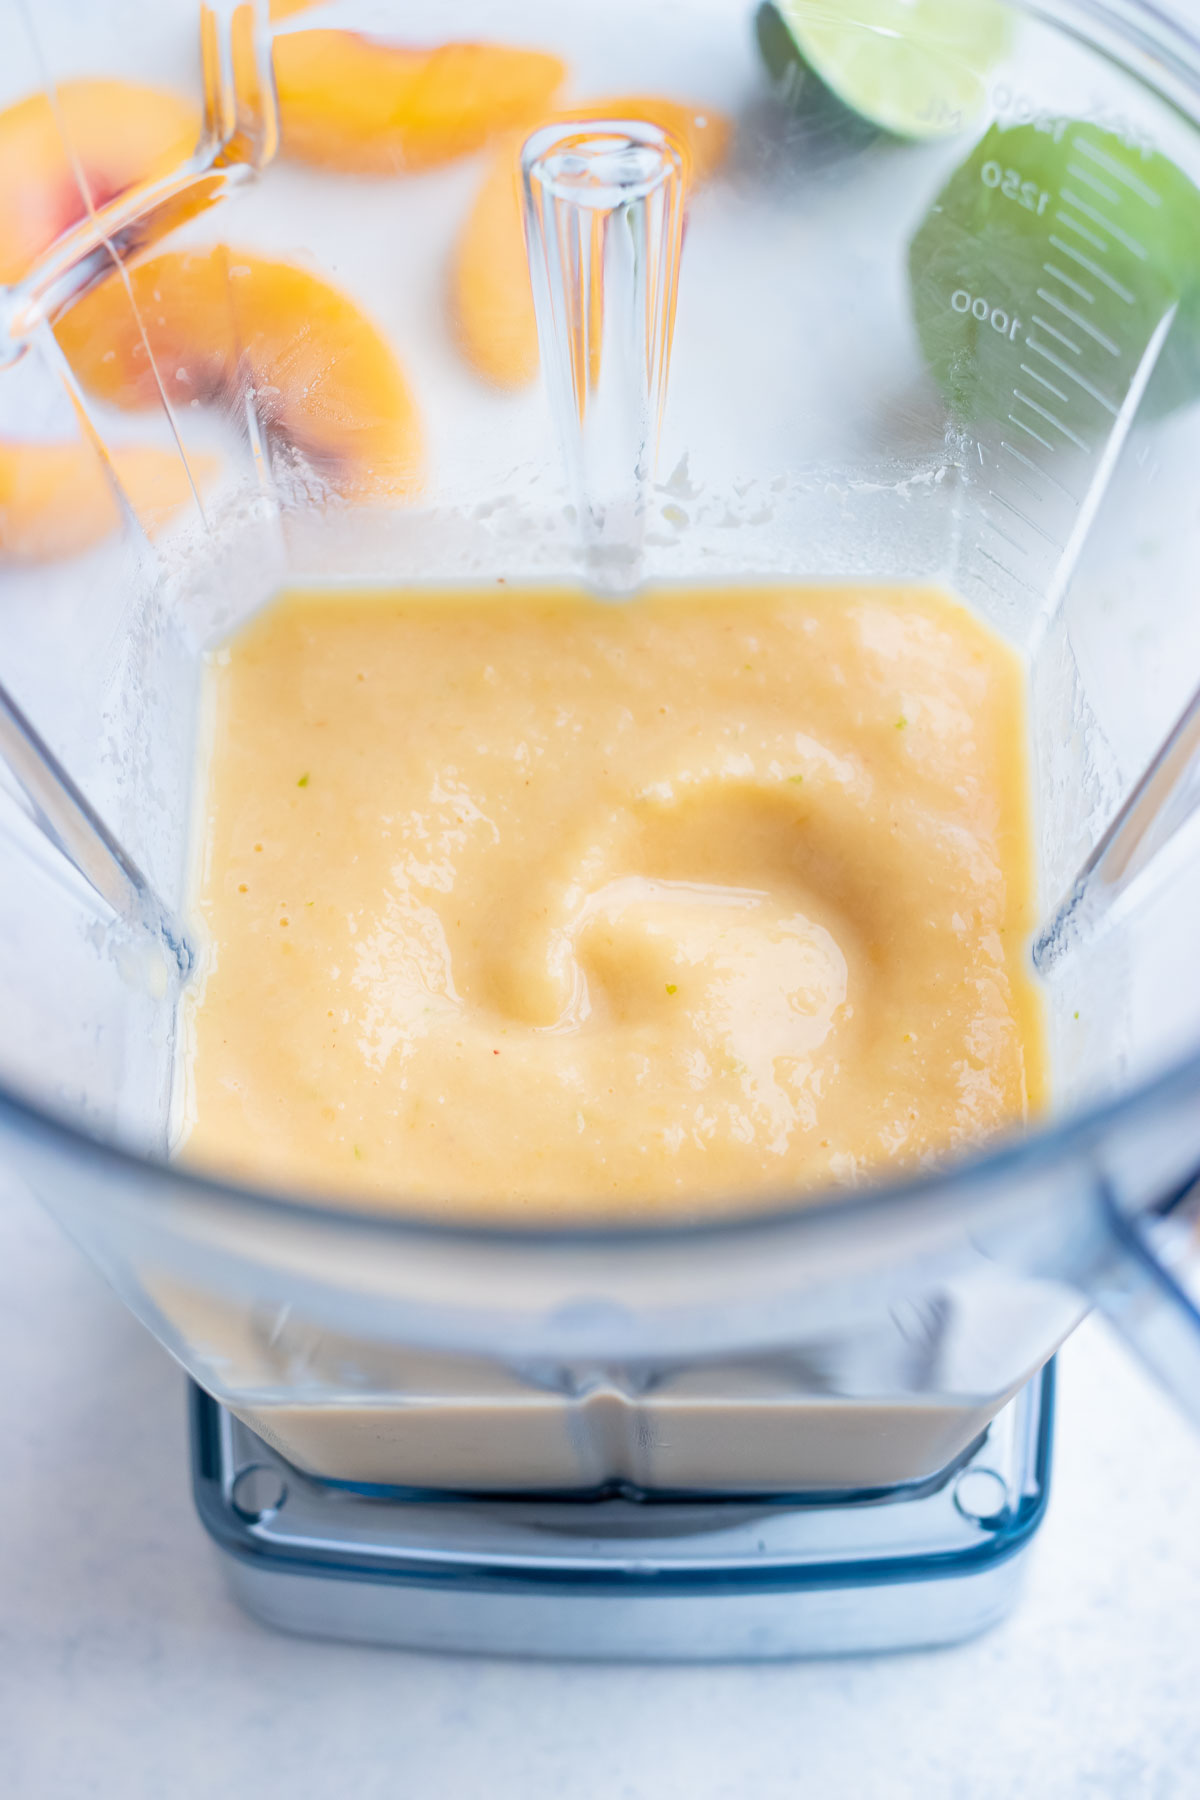 All the ingredients are mixed in a blender until smooth.